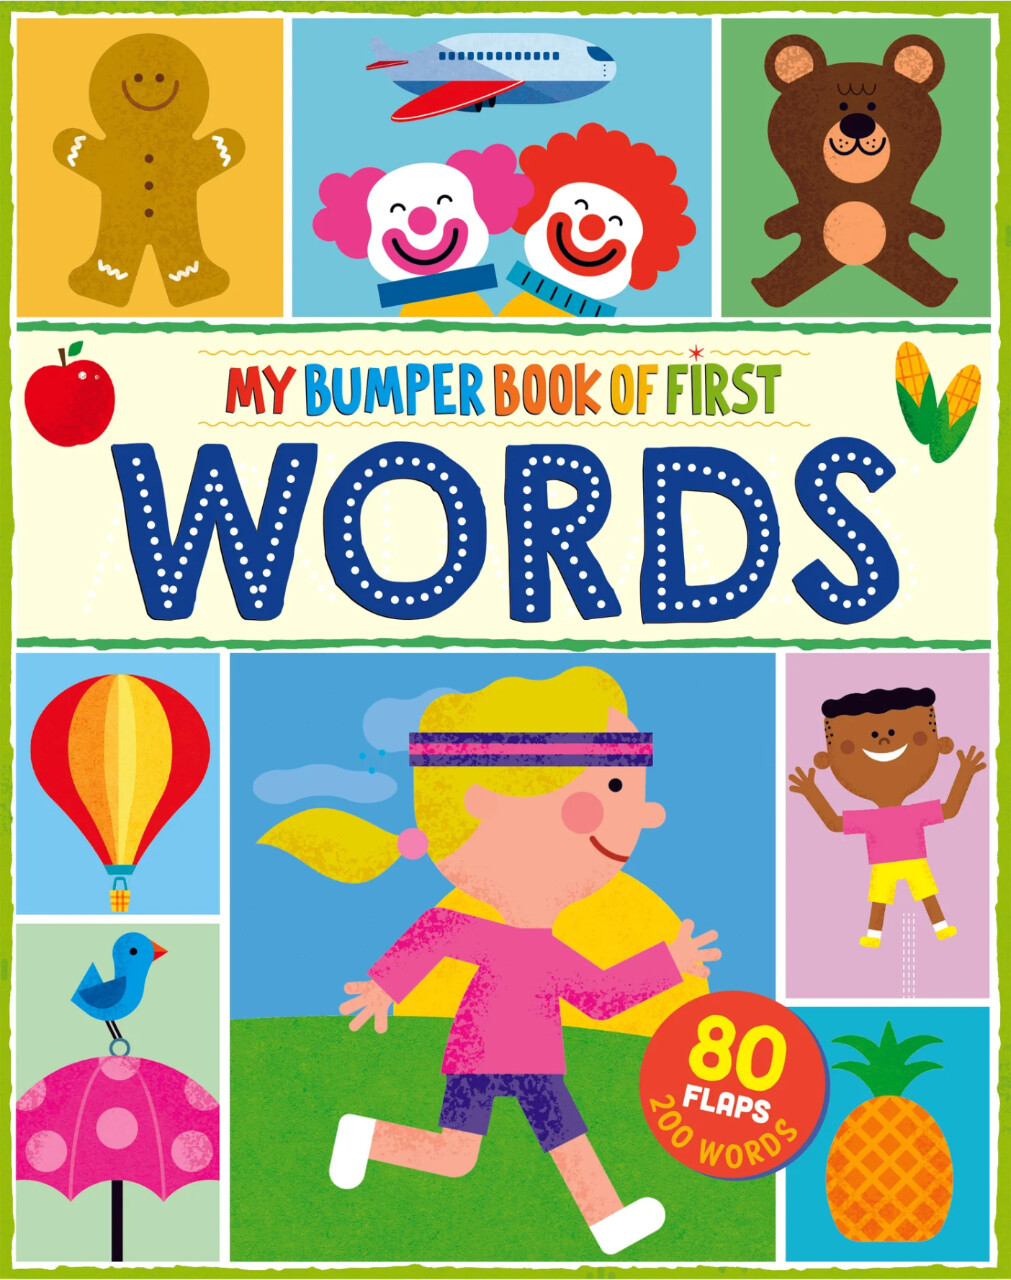 My Bumper Book of First Words